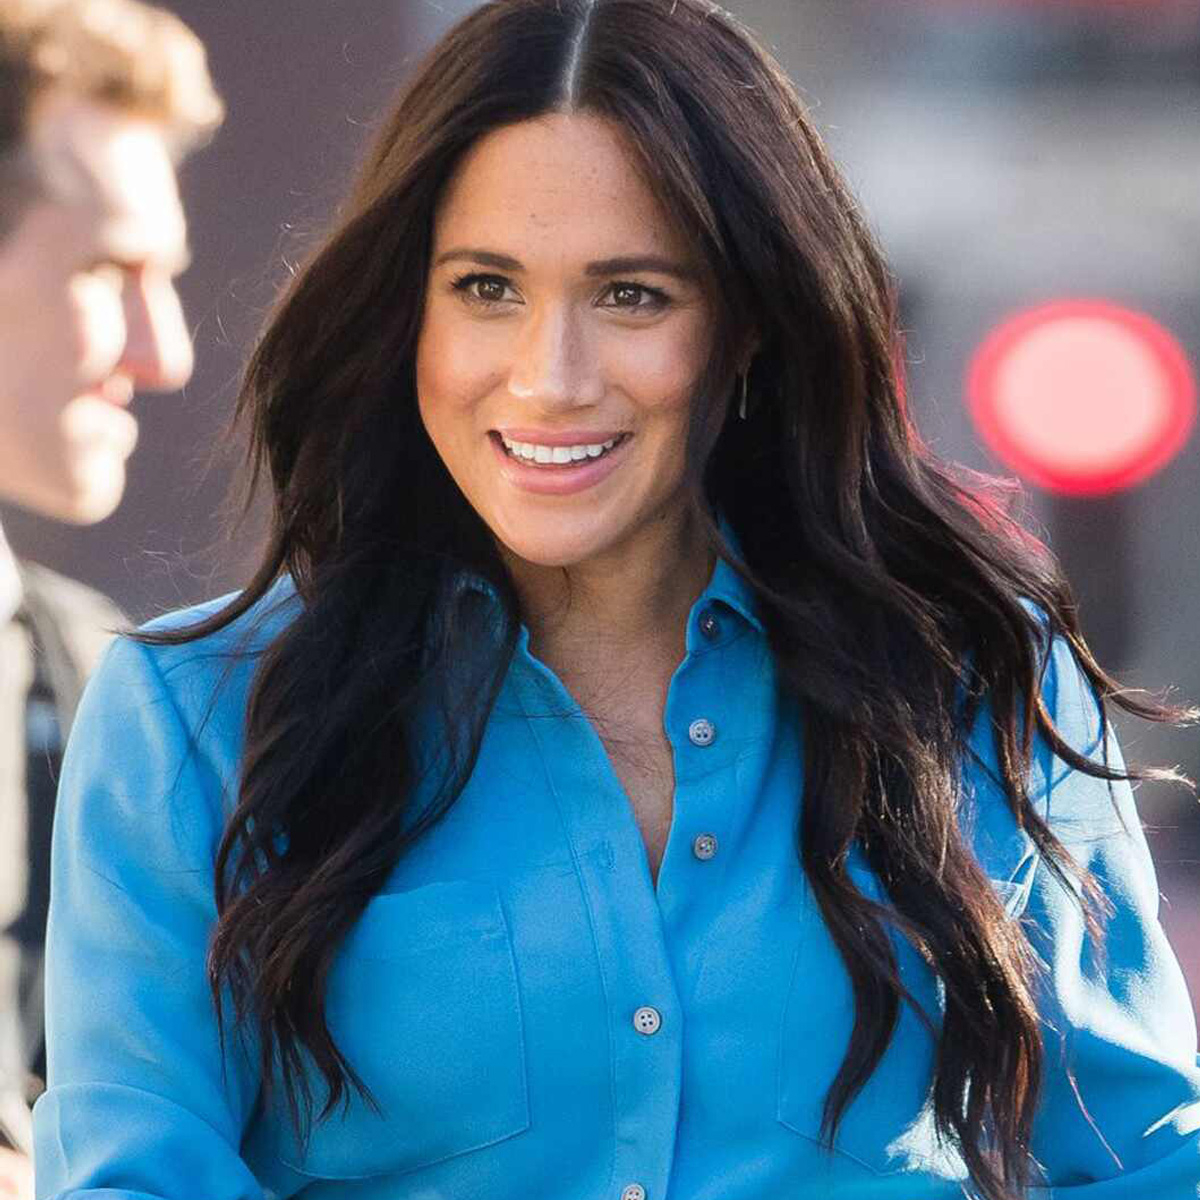 Here is the powerful message behind Meghan Markle’s pregnancy outfit